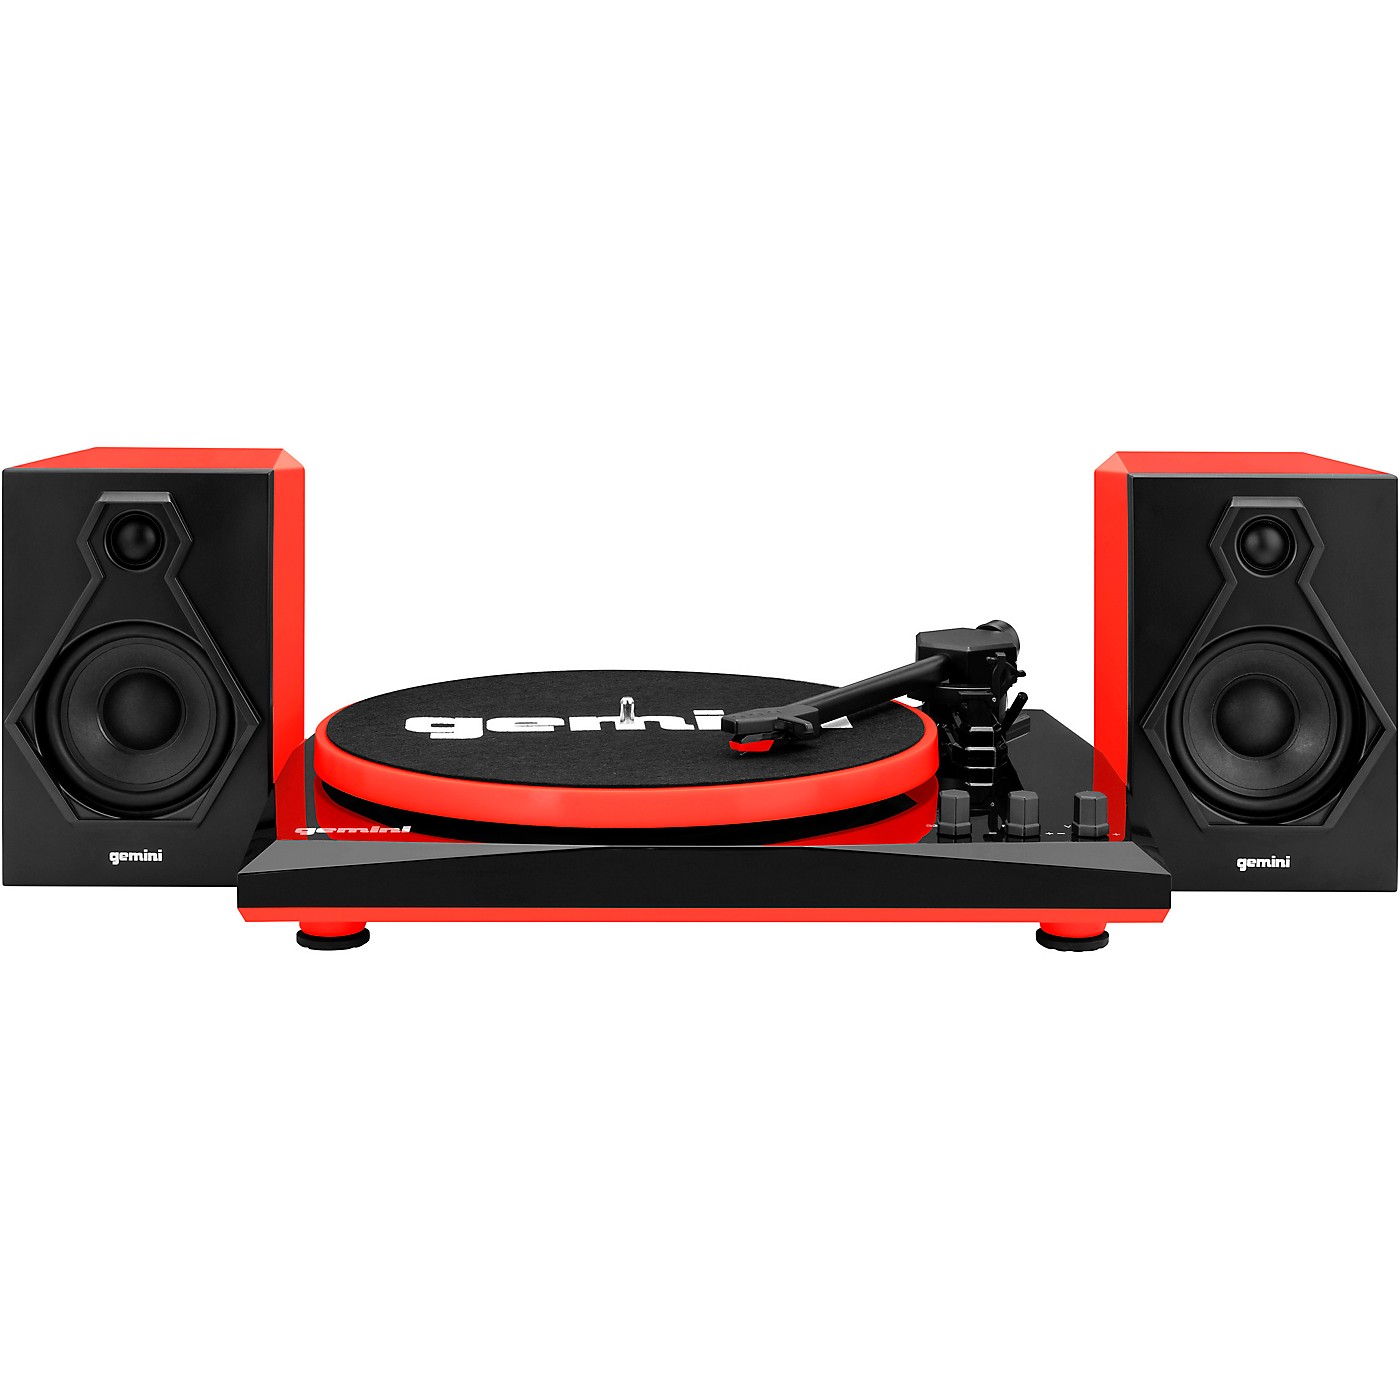 Gemini TT-900BR Vinyl Record Player Turntable With Bluetooth and Dual Stereo Speakers thumbnail